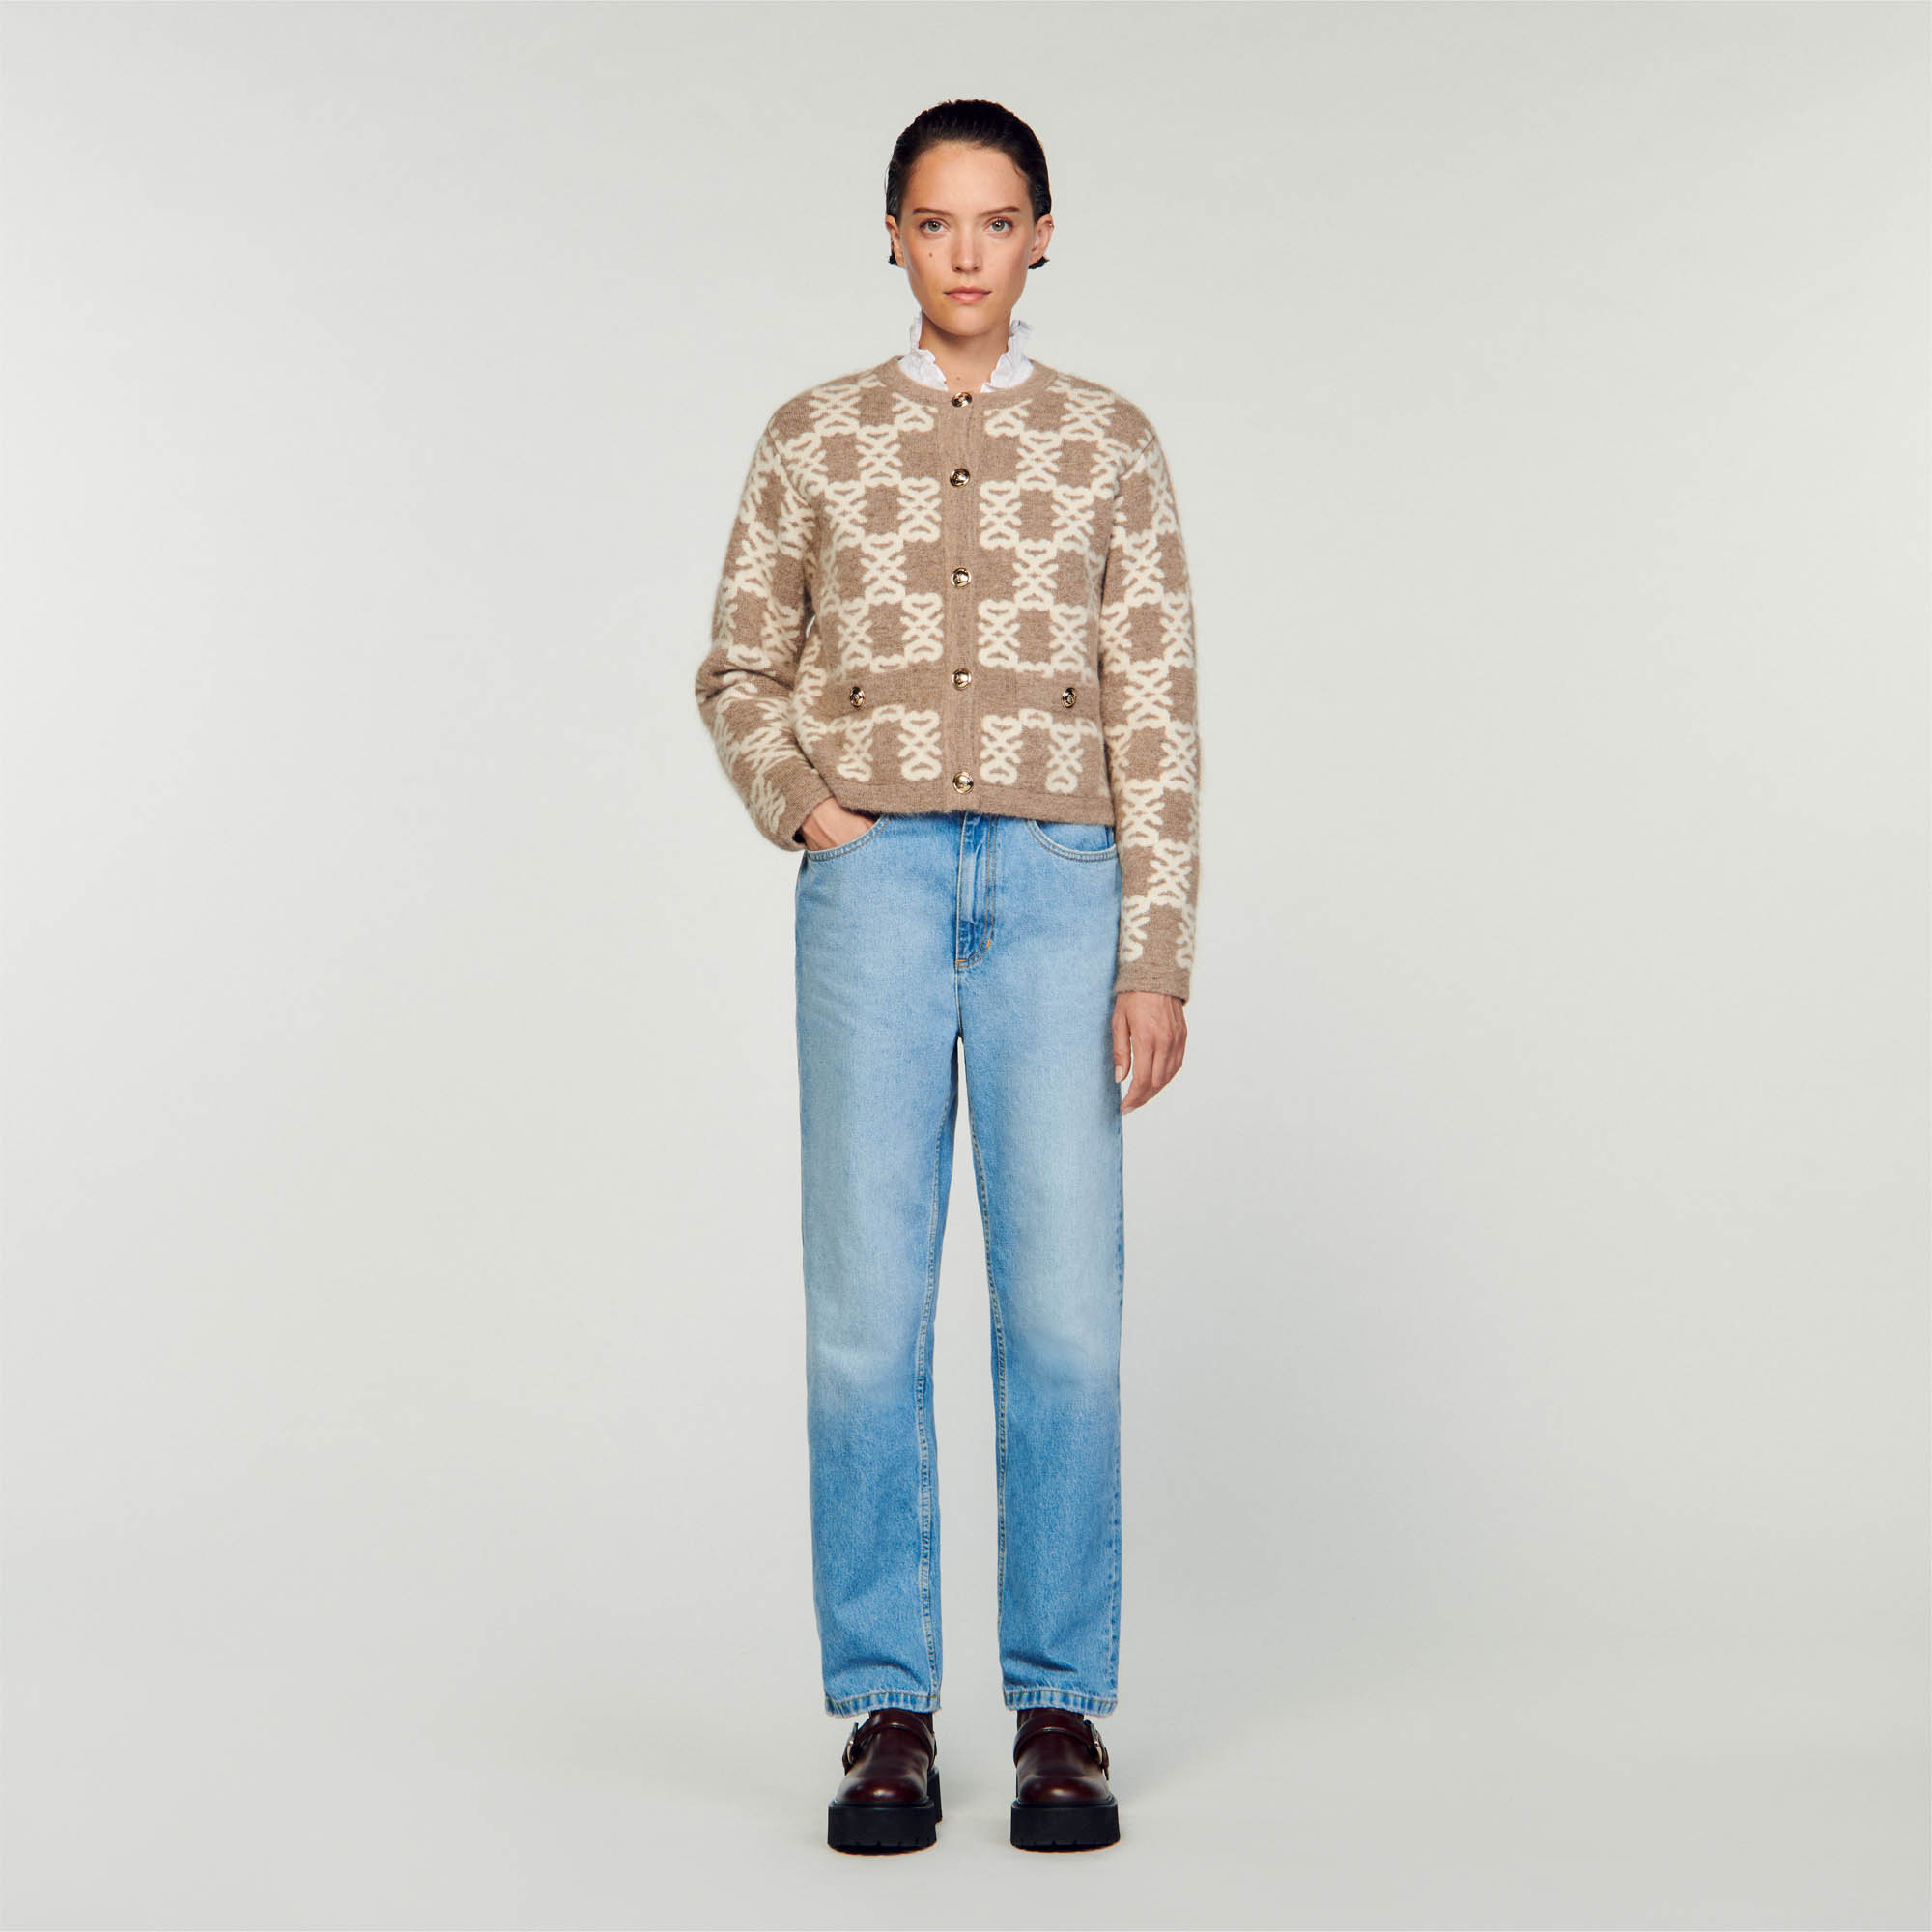 Sandro polyamide Double-S jacquard knit coatigan with contrasting stripes, long sleeves, decorative button fastening and welt pockets on waist